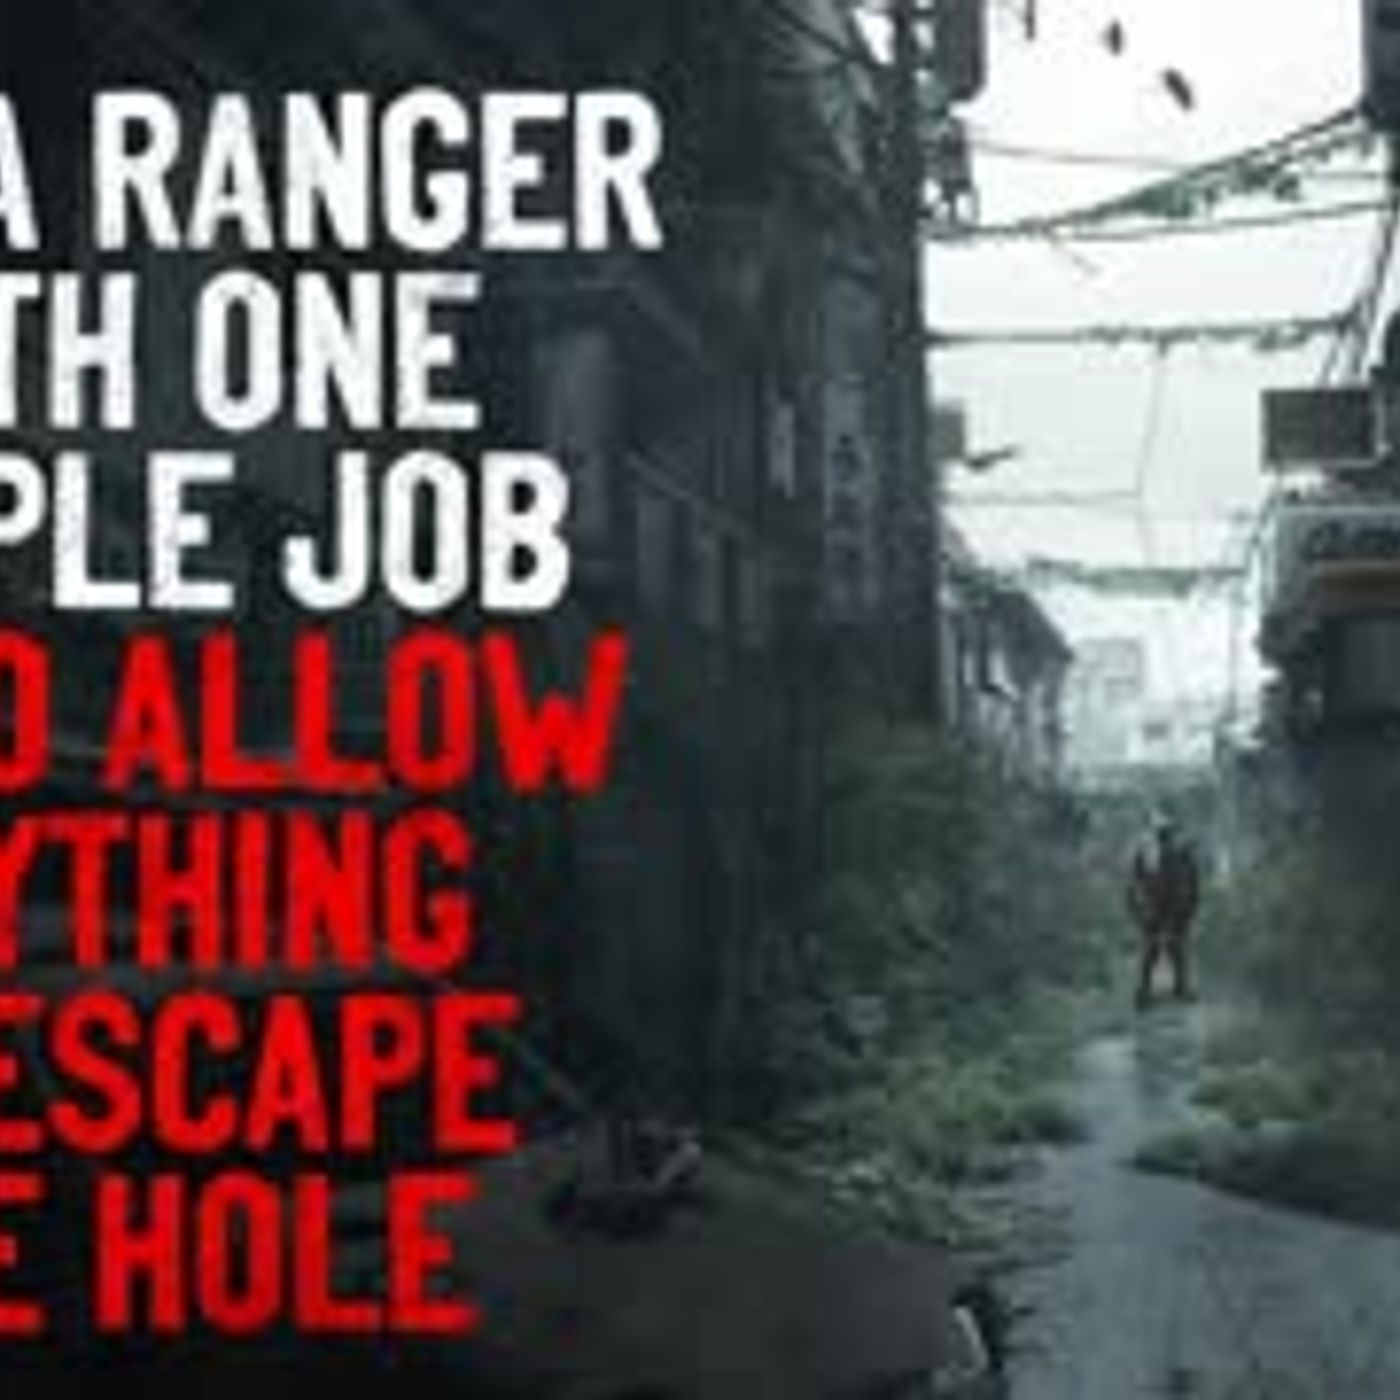 "I’m a ranger with one simple job- Do not allow anything to escape the hole" Creepypasta